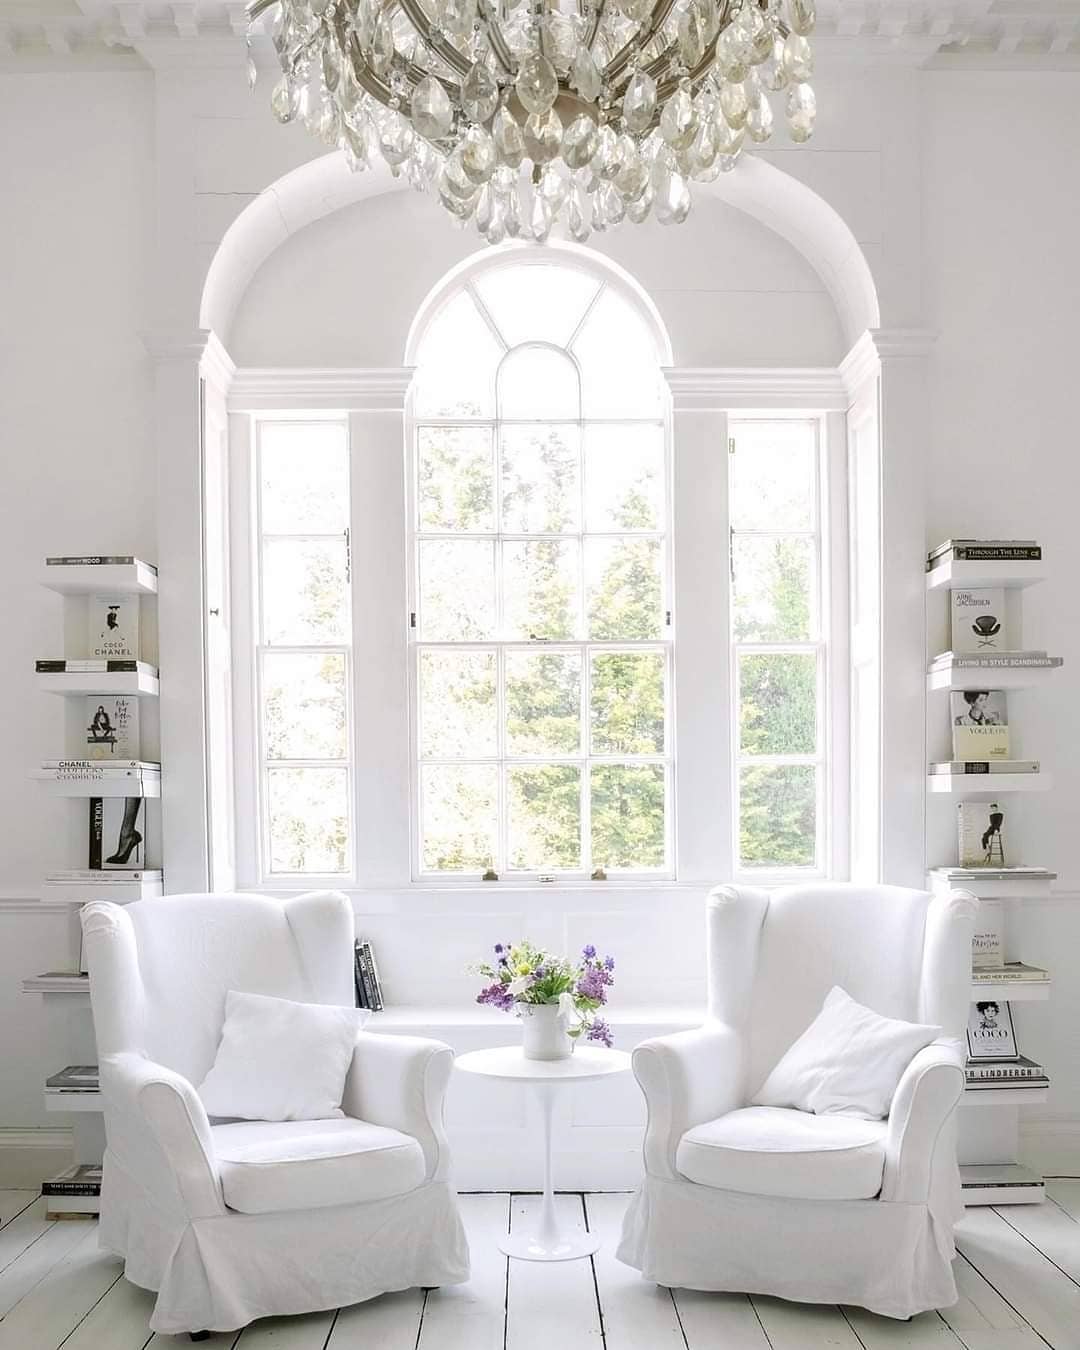 Sitting Room with Large Window letting in Light. Photo by Instagram user @dinoparrella